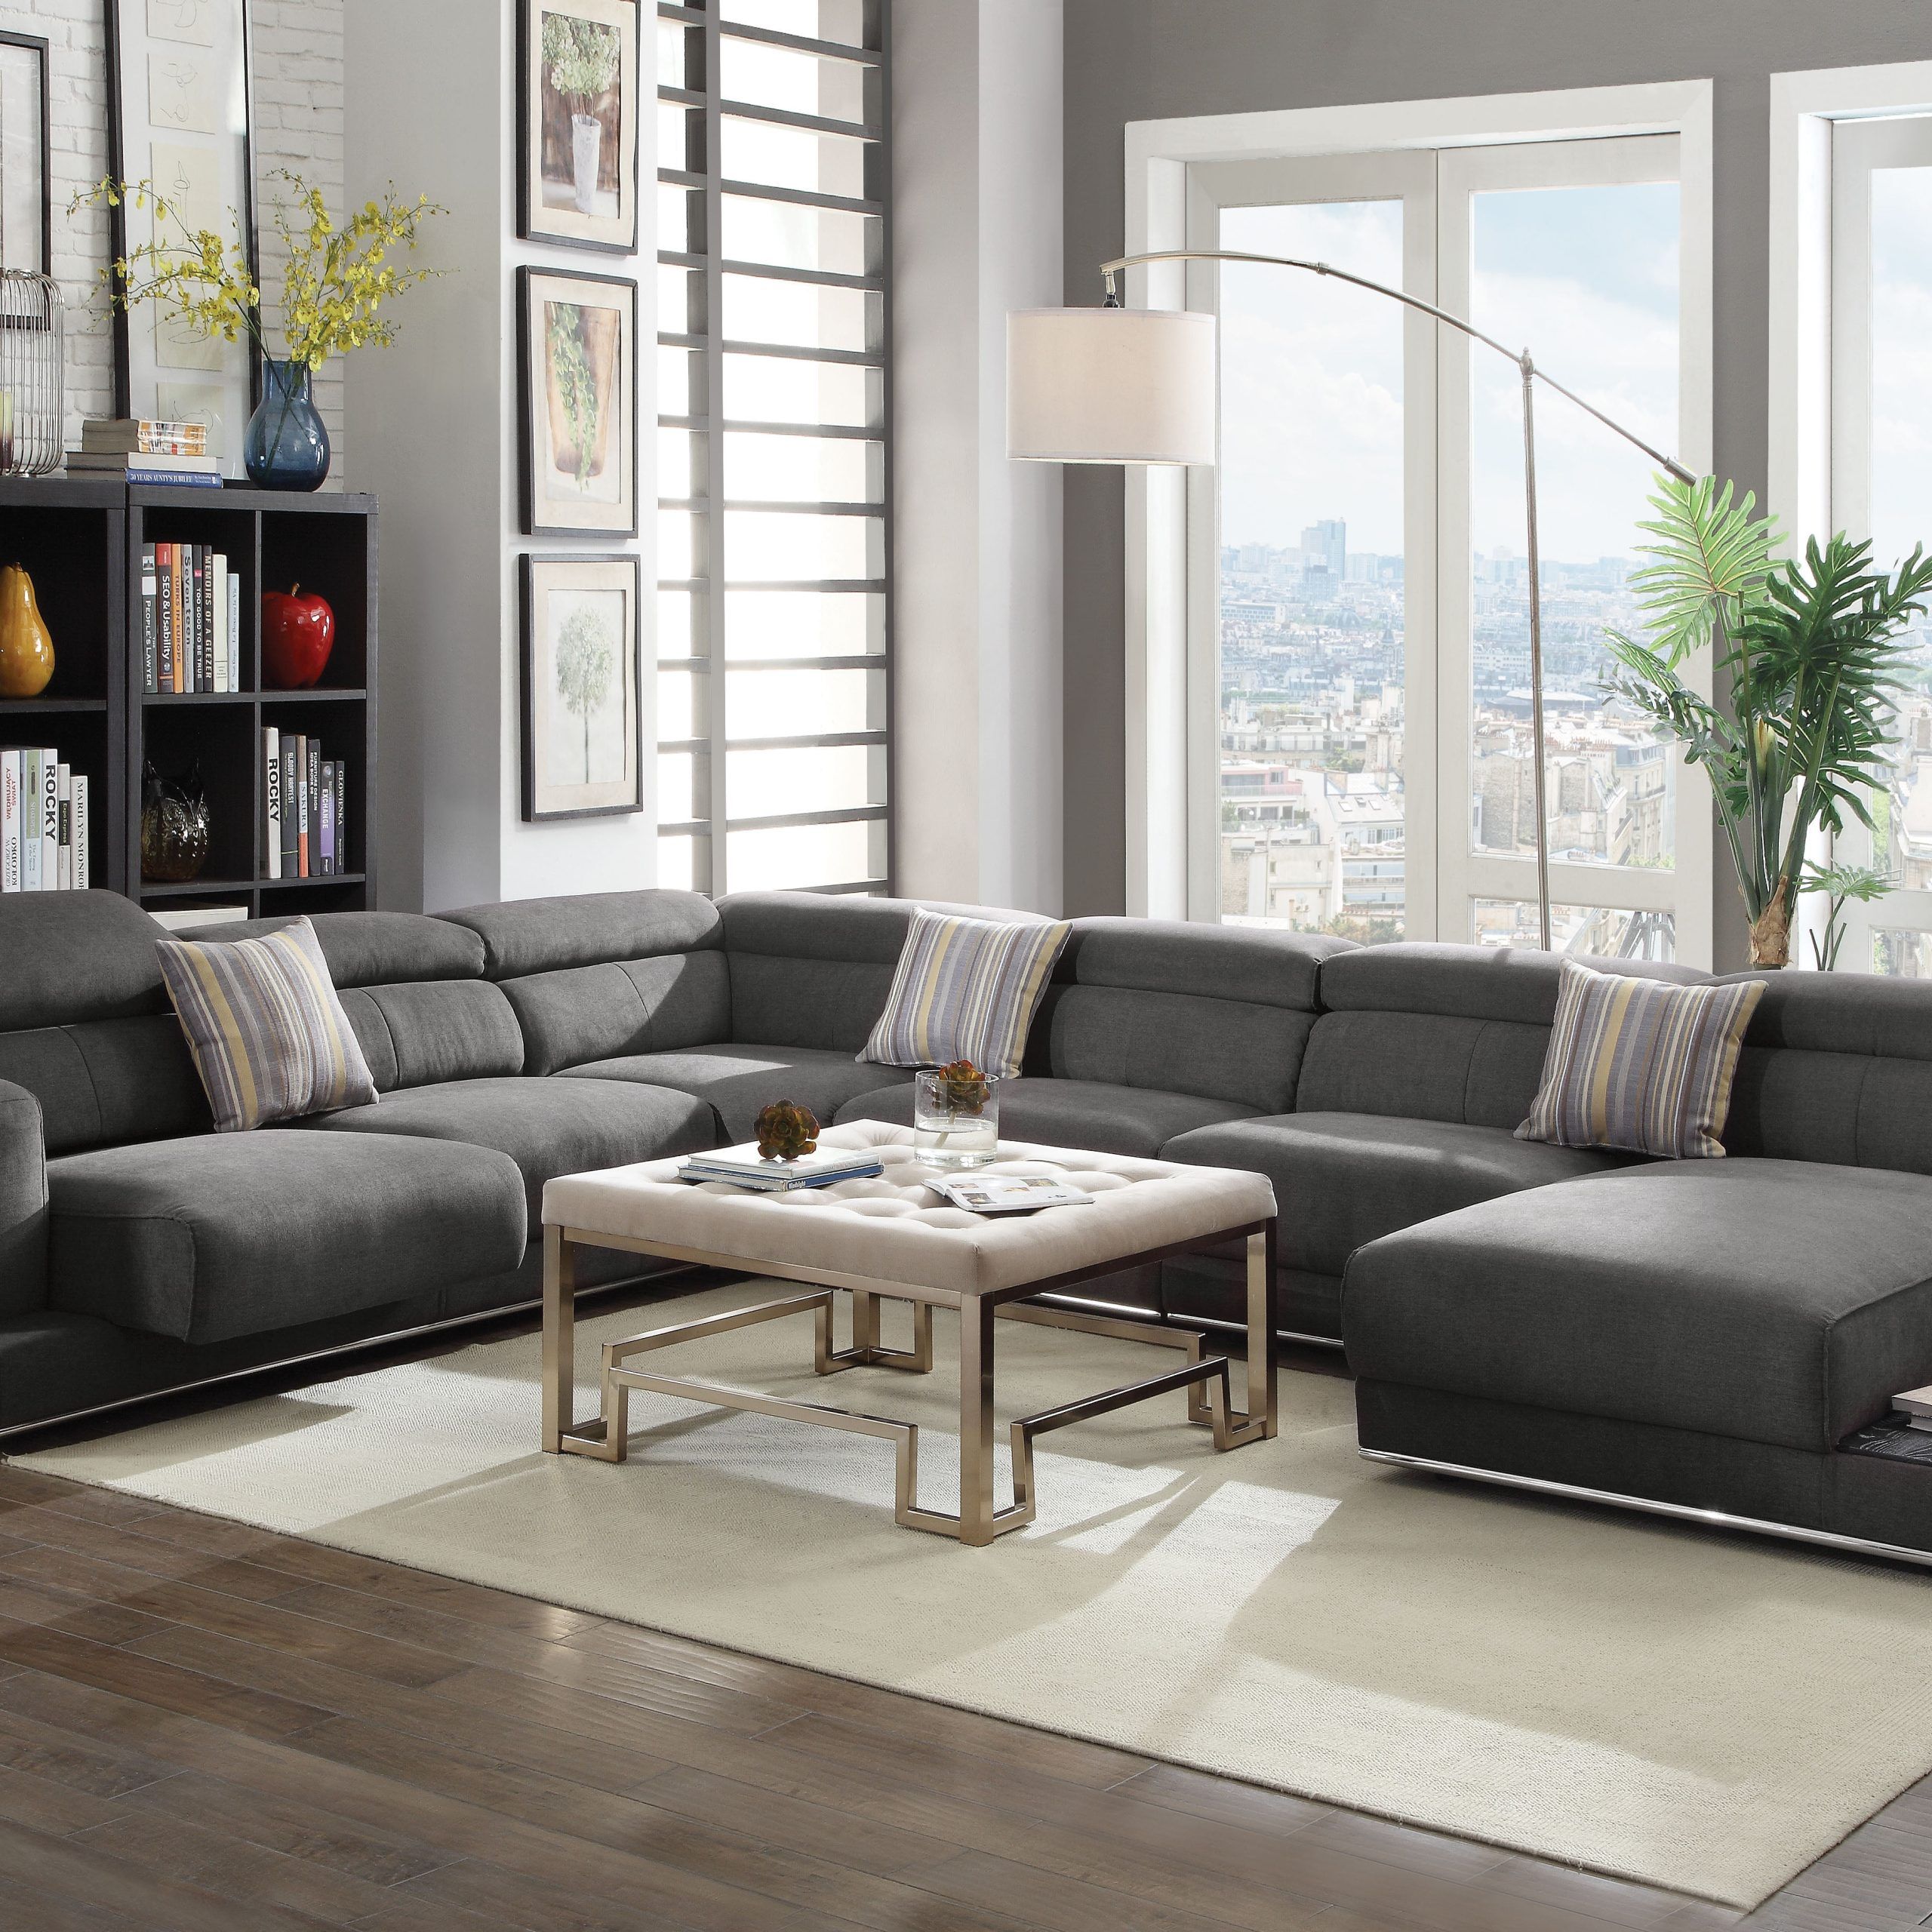 Acme Alwin Sectional Sofa In Dark Gray Fabric Upholstery – Walmart Within Sofas In Dark Grey (Gallery 7 of 20)